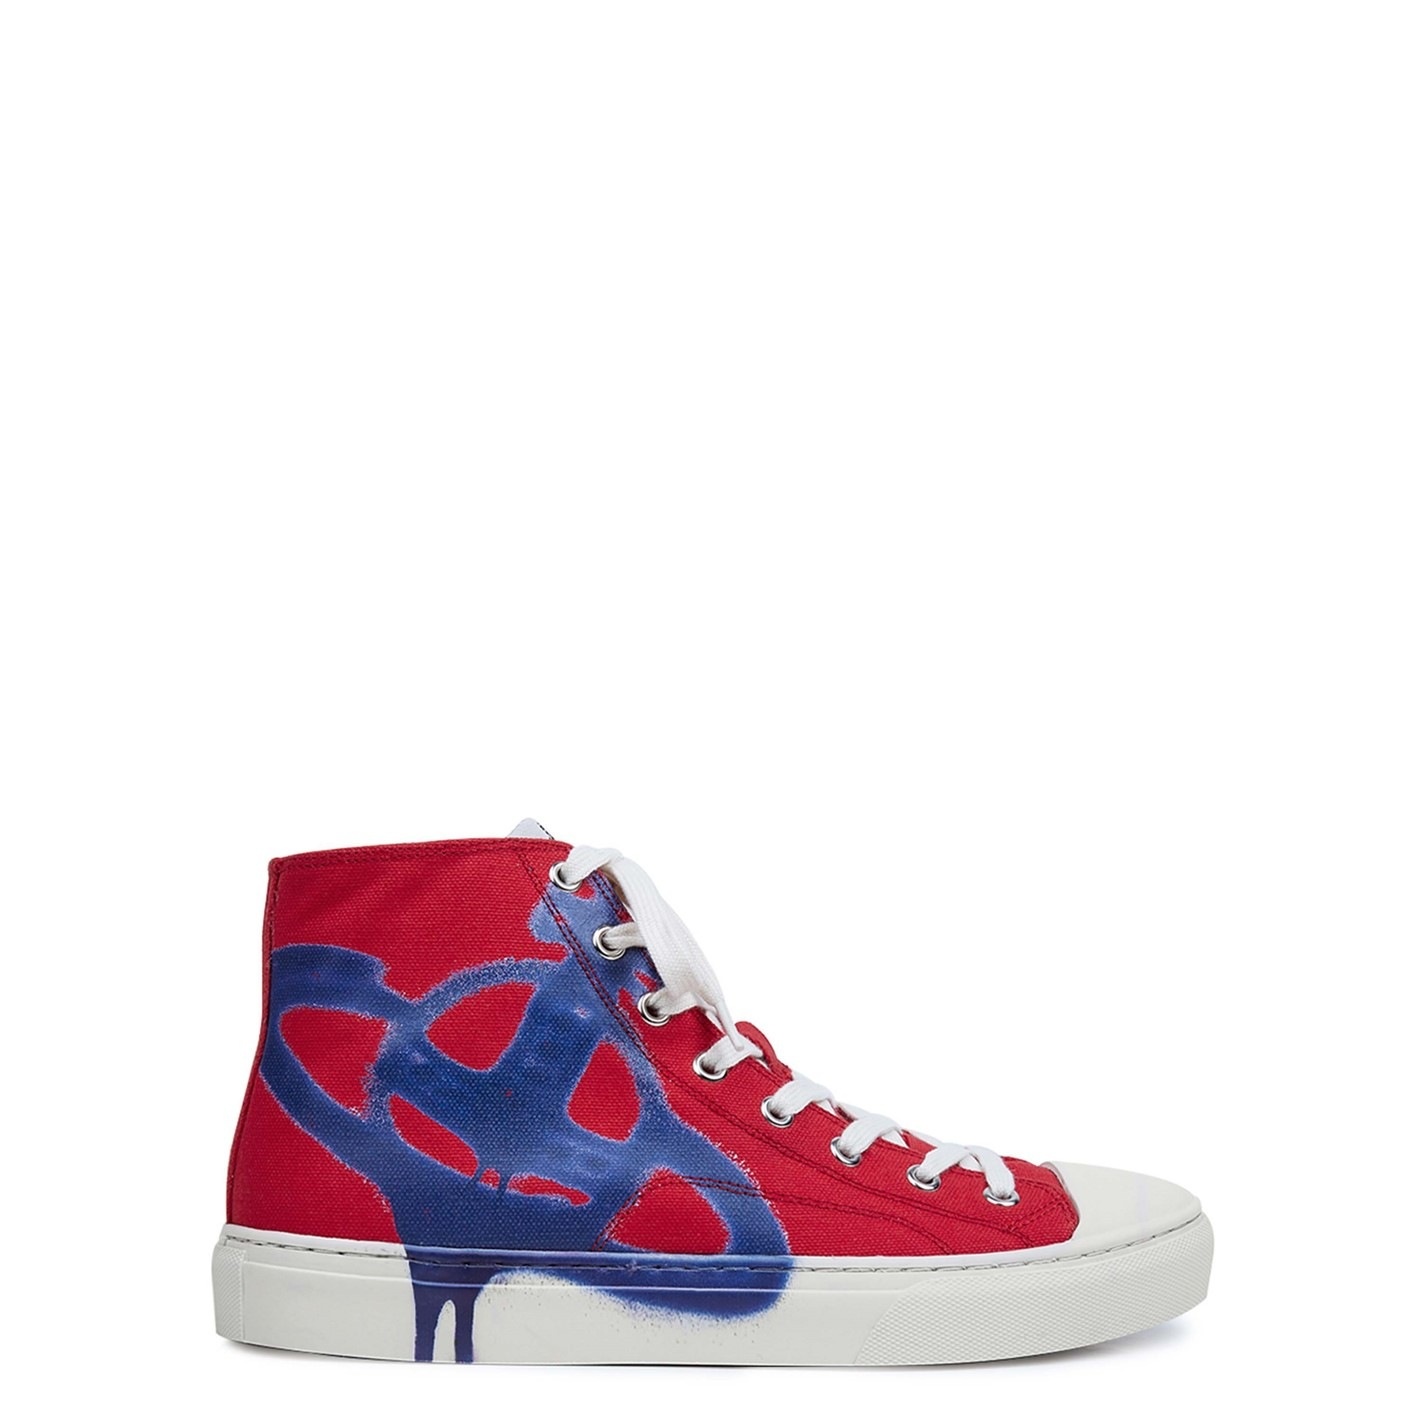 PLIMSOLL HIGH TOP TRAINERS - 8